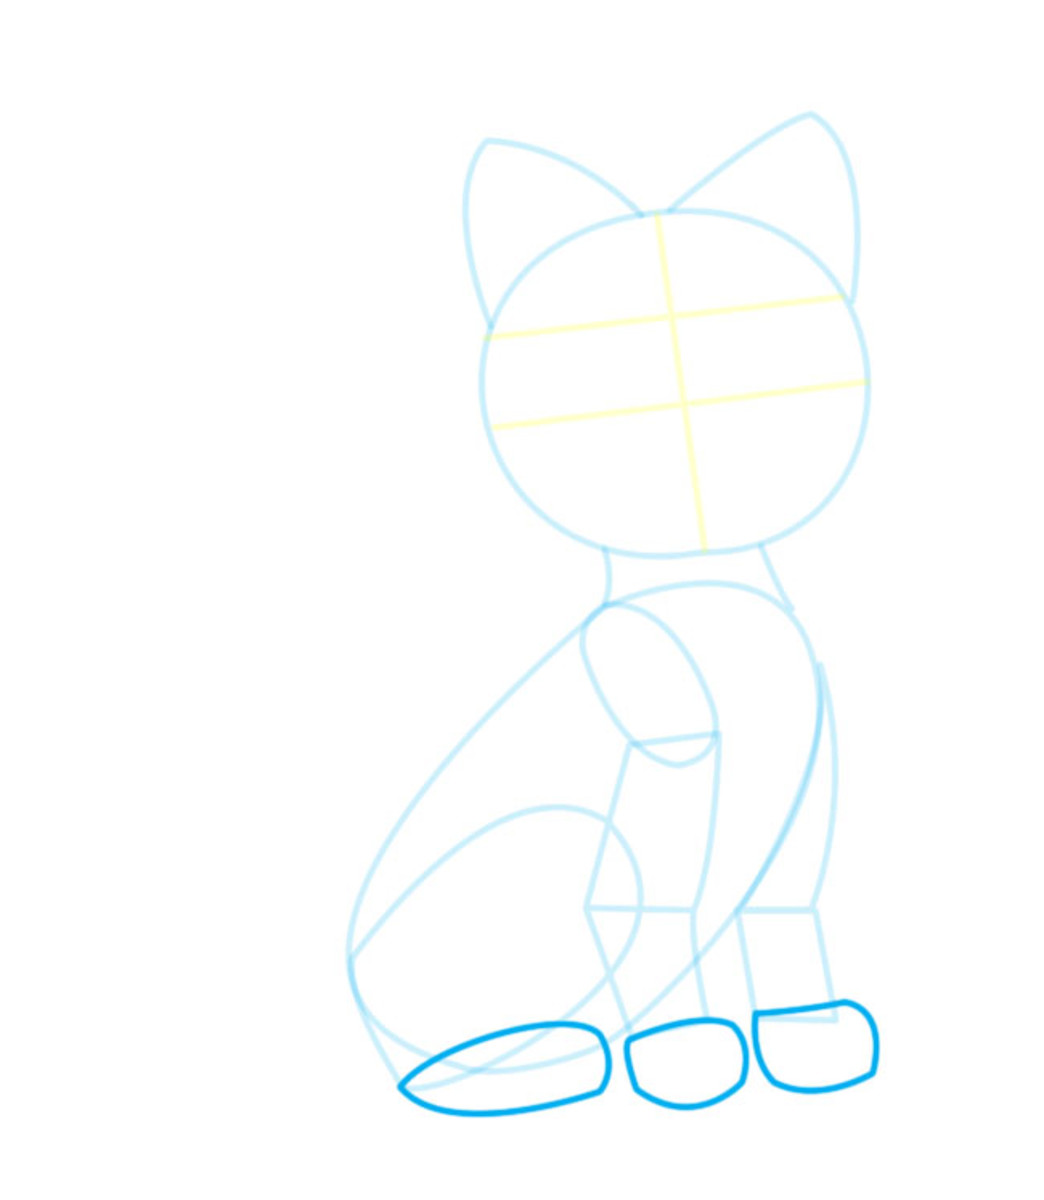 Step 8. Draw the cat's feet with oval shapes.